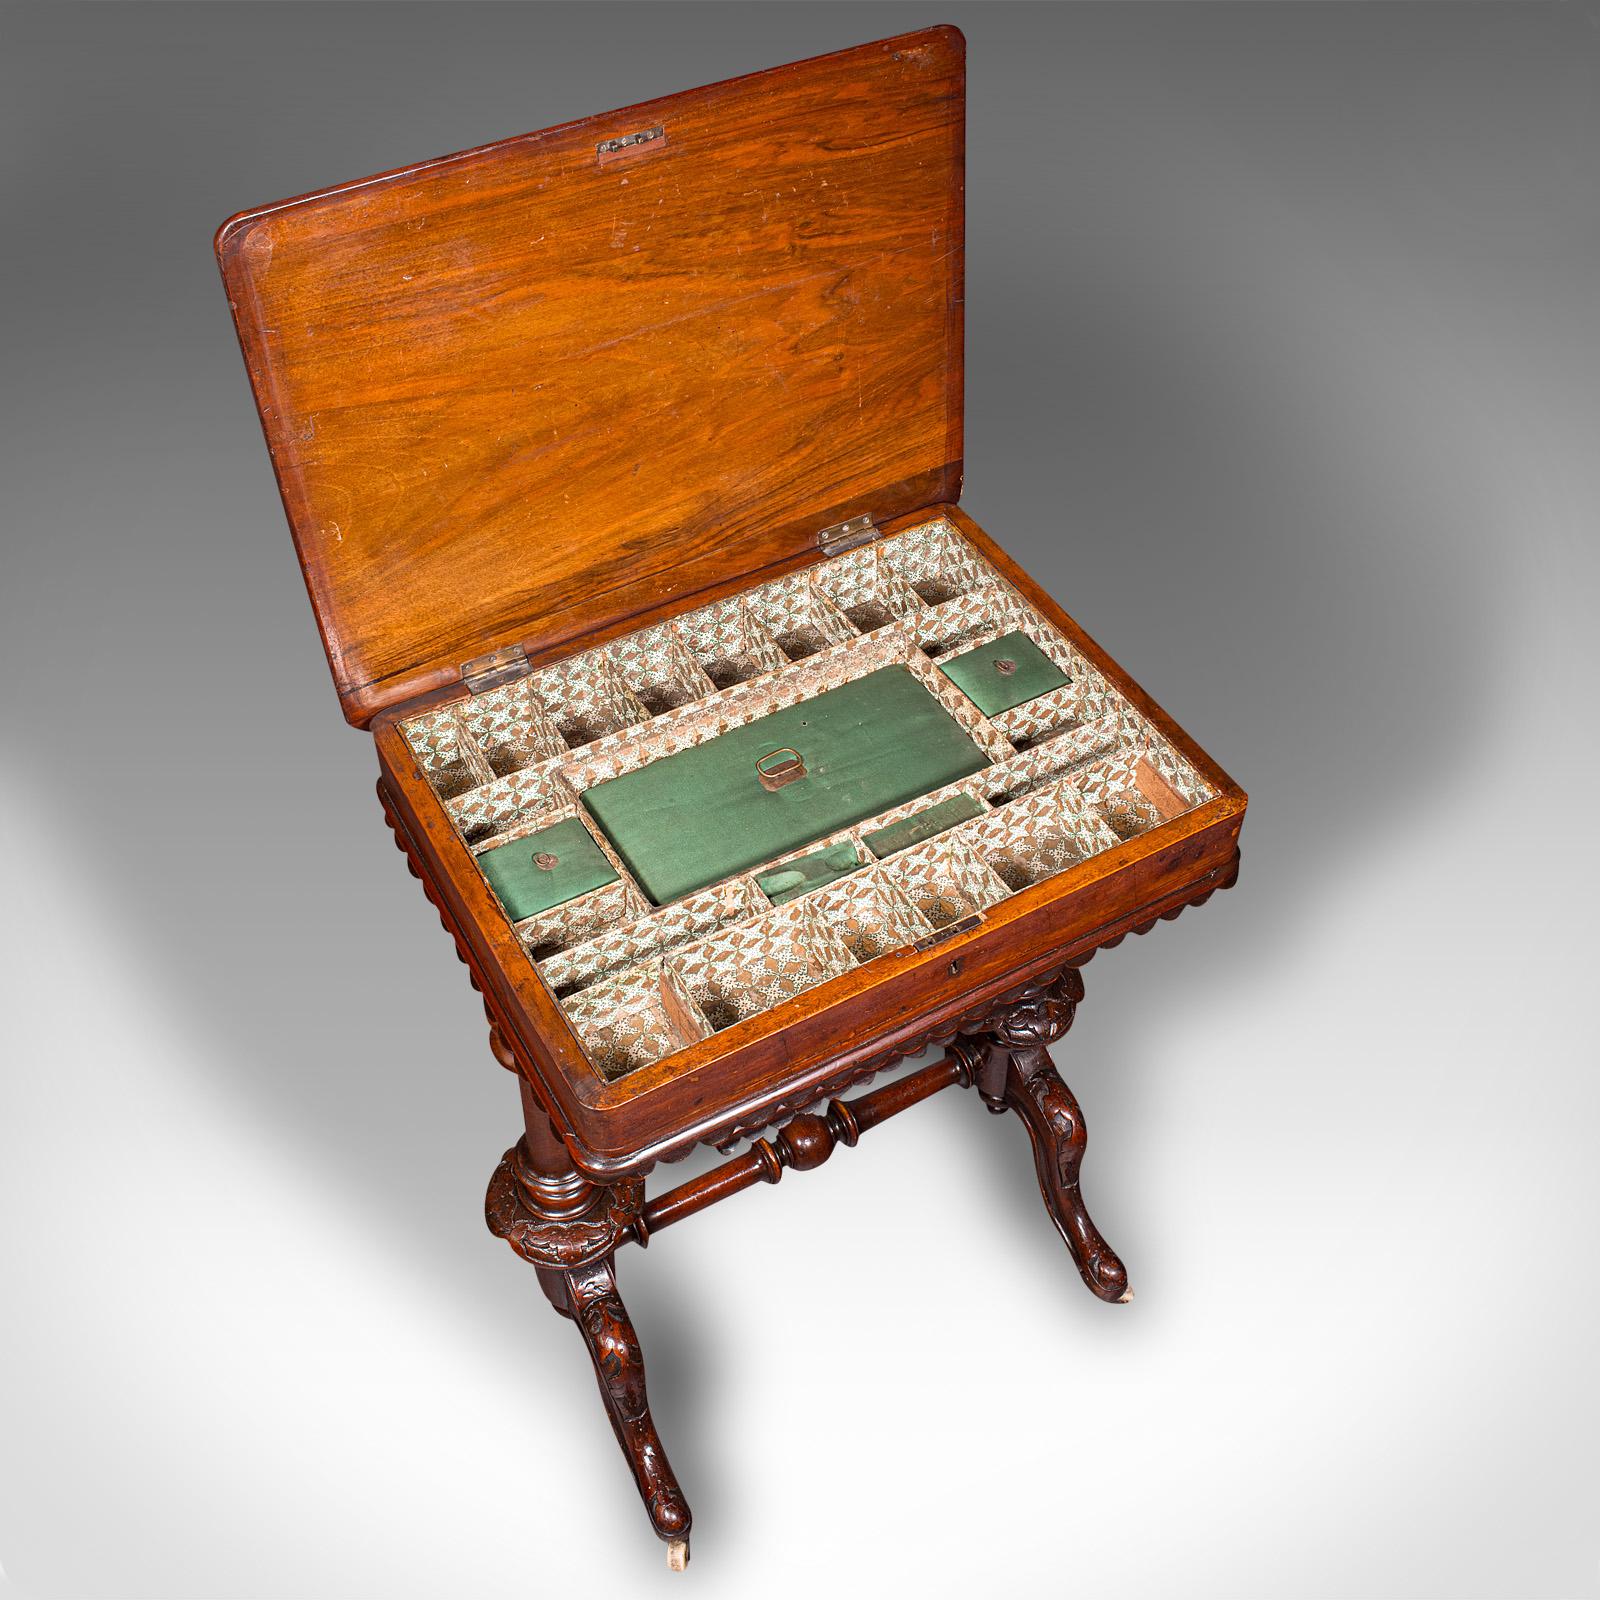 Antique Ladies Work Table, English, Burr Walnut, Sewing Table, Victorian, C.1850 For Sale 2